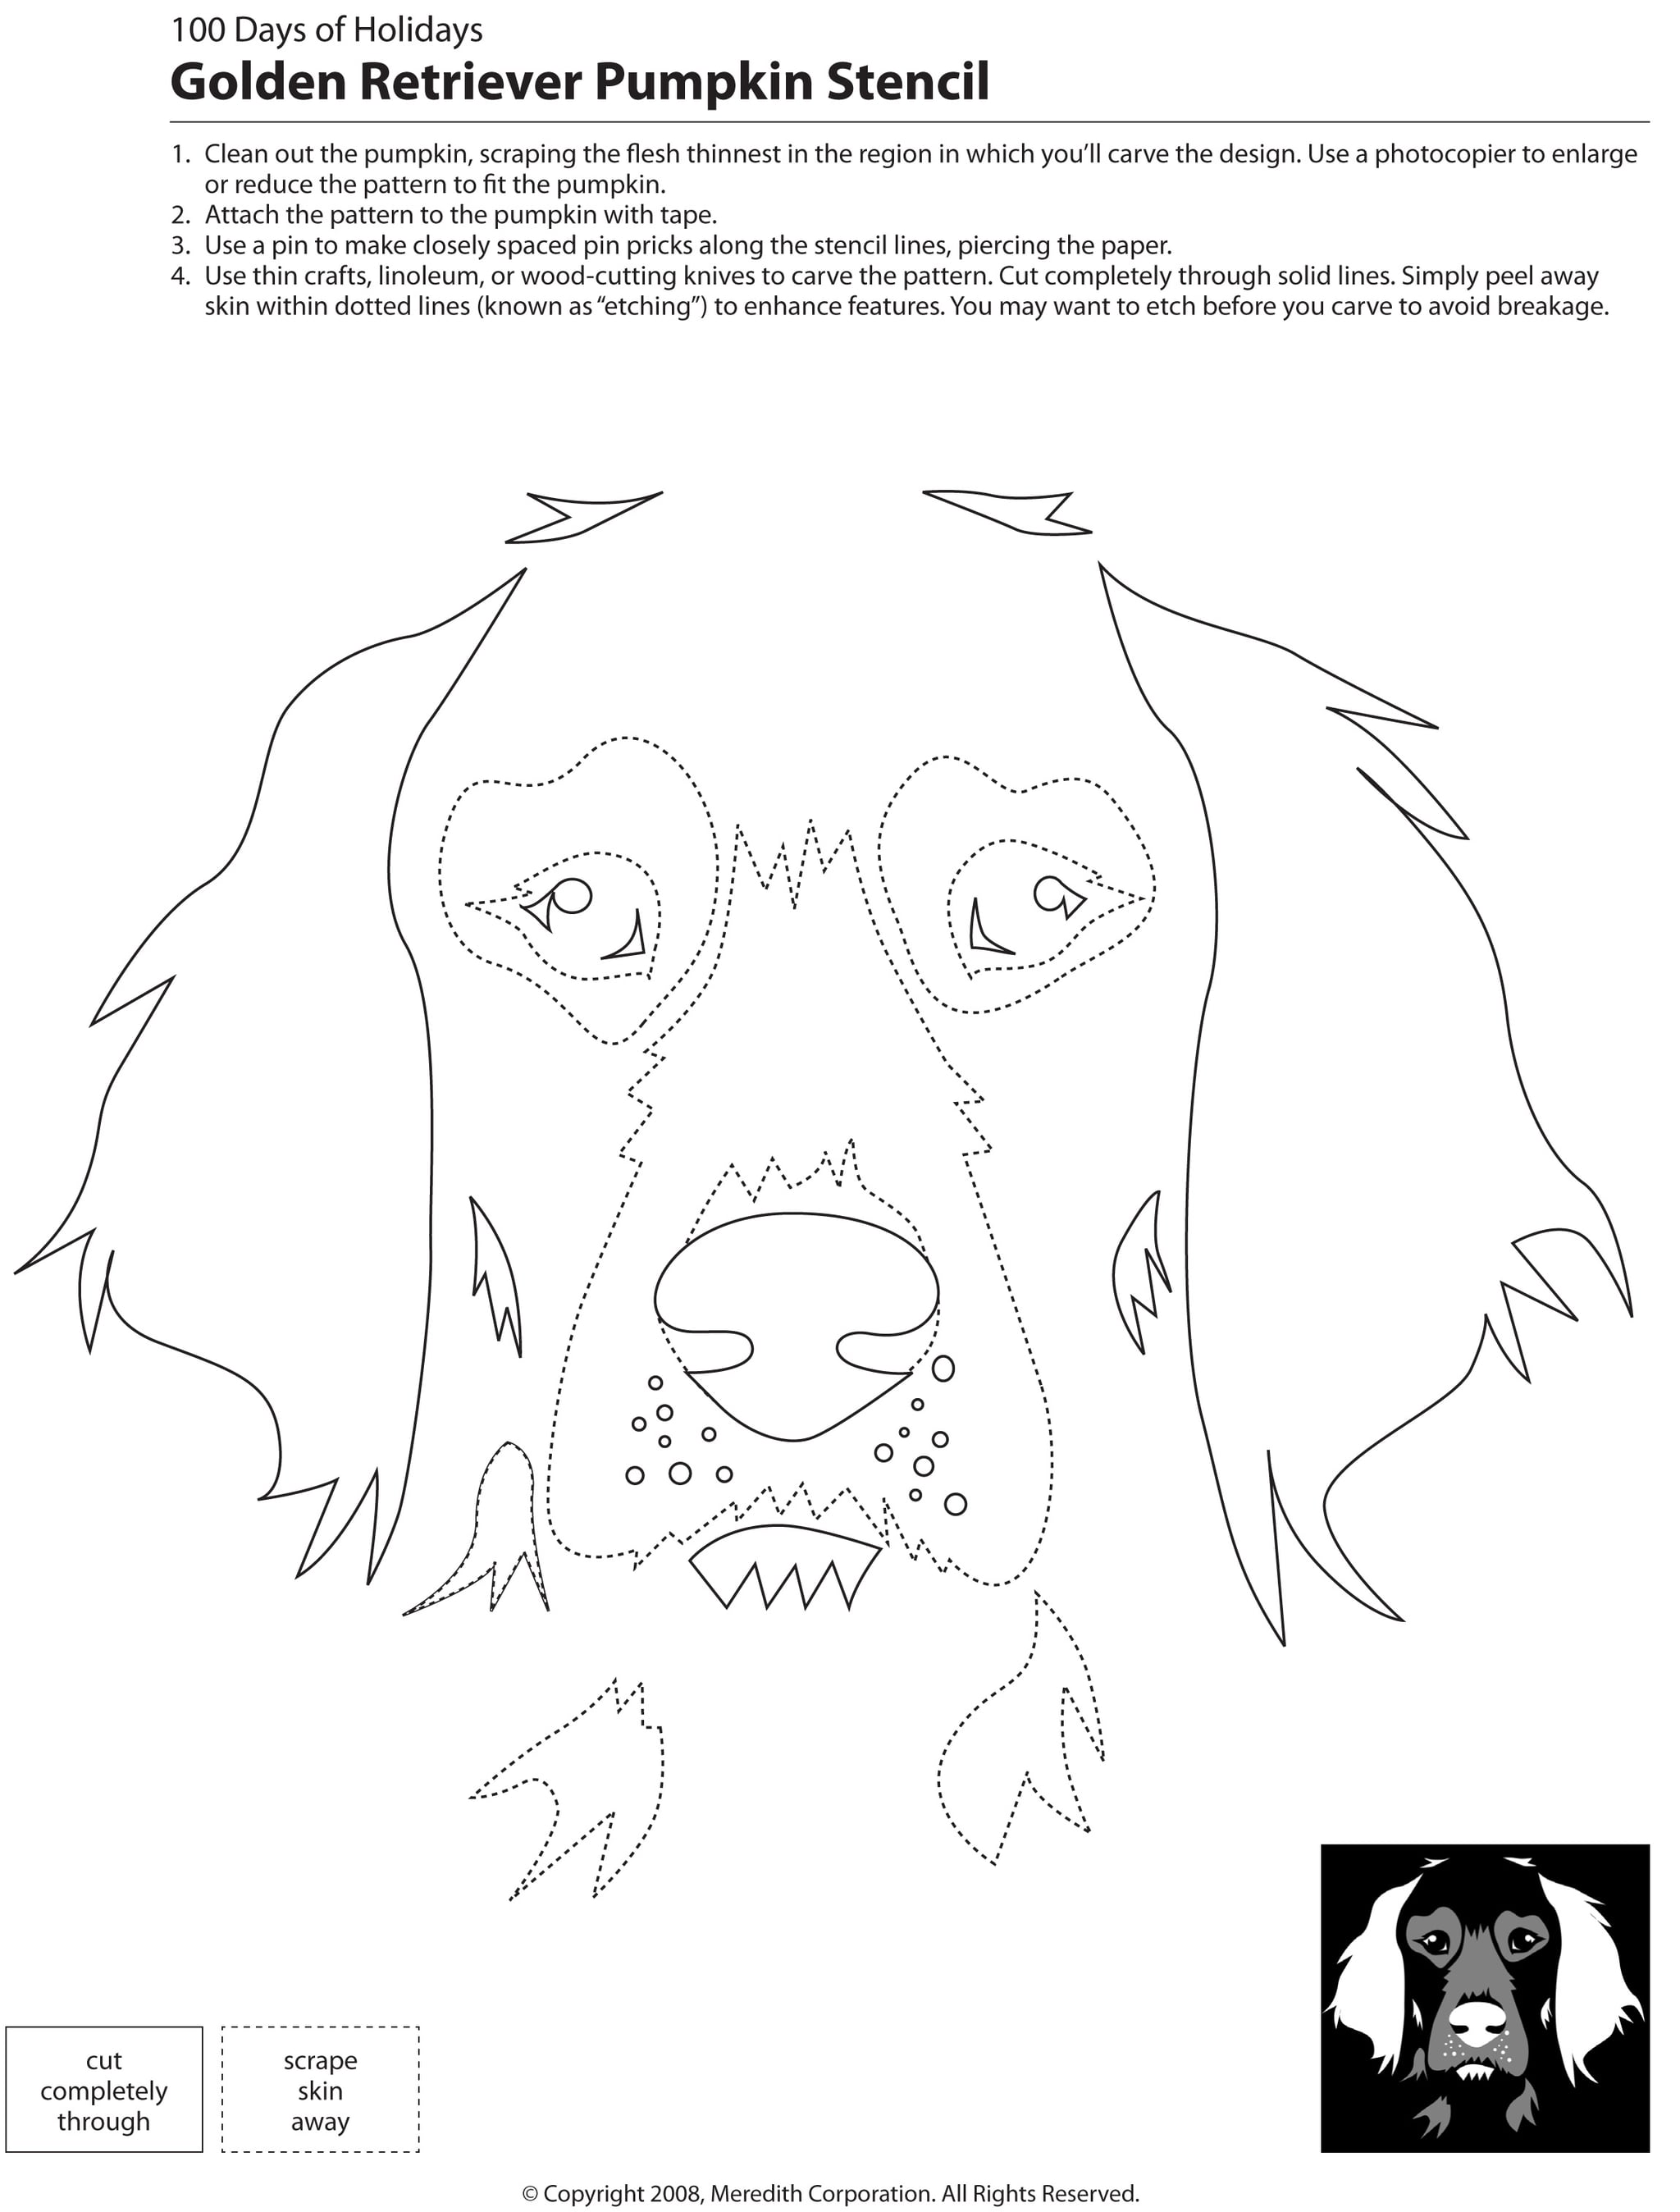 dogs-cats-and-other-pets-22-downloadable-dog-breed-pumpkin-stencils